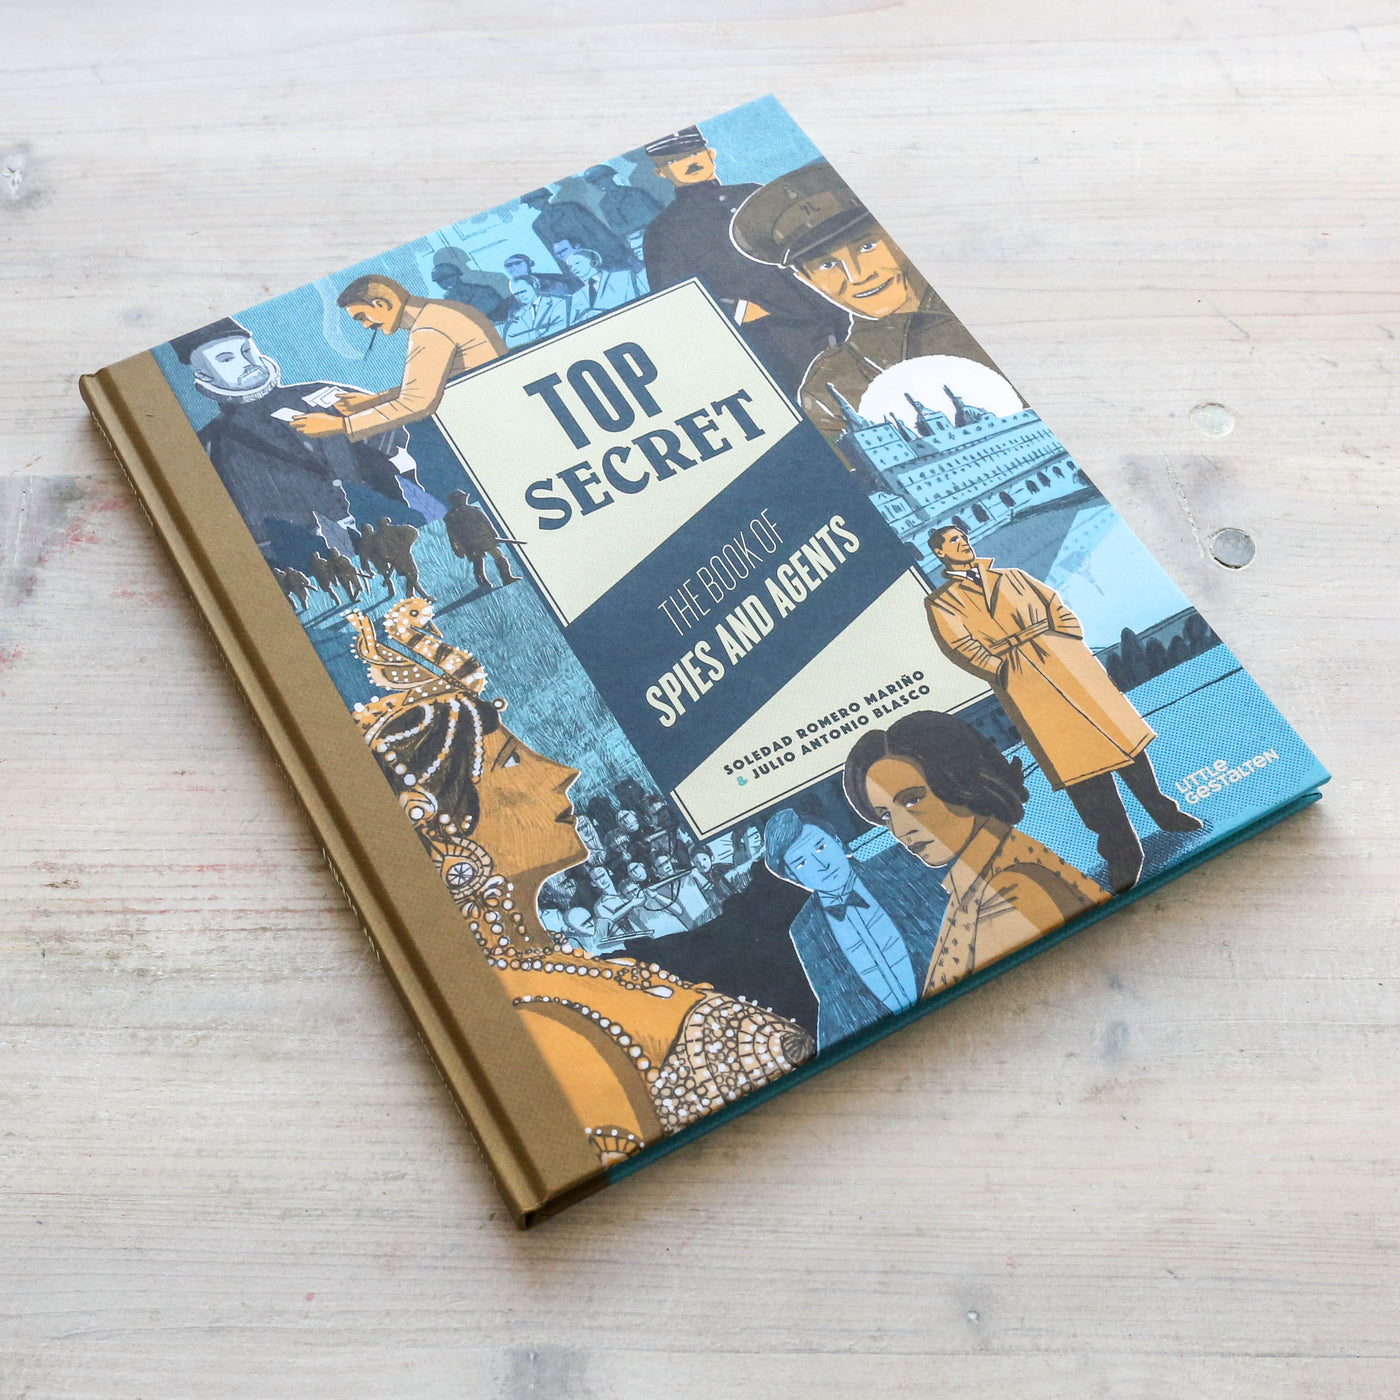 Top Secret : The Book of Spies and Agents